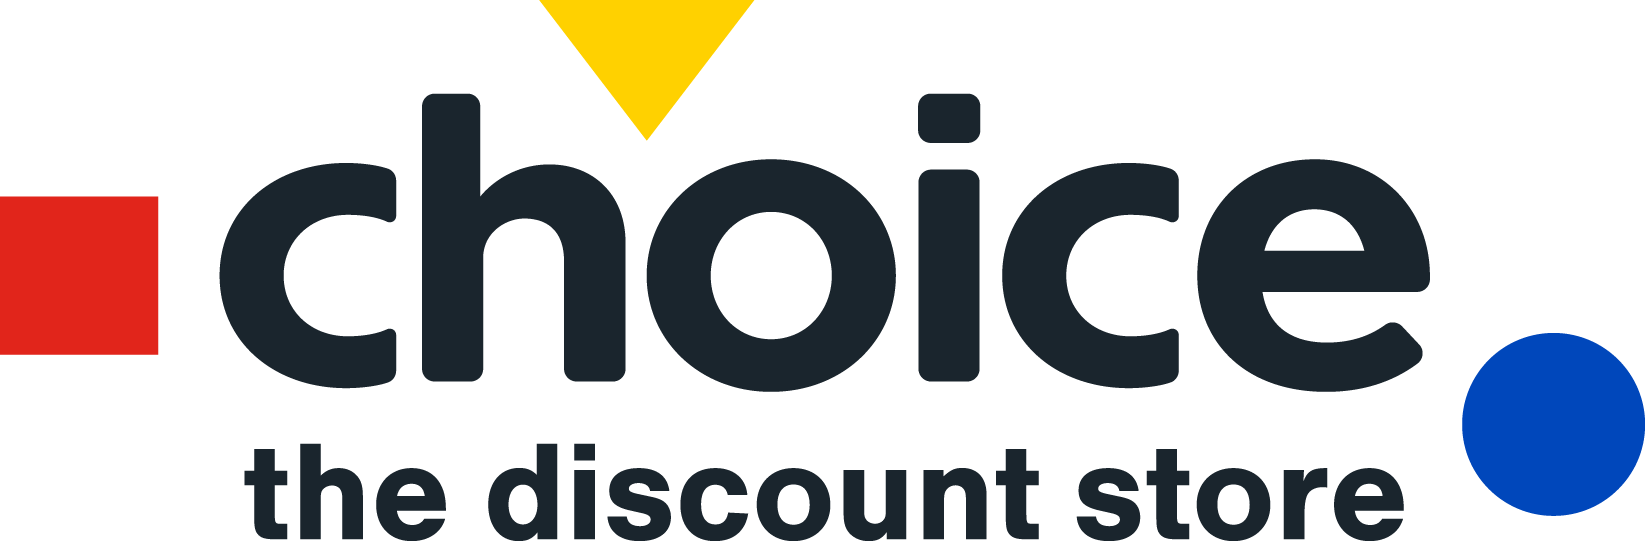 Choice The Discount Store logo